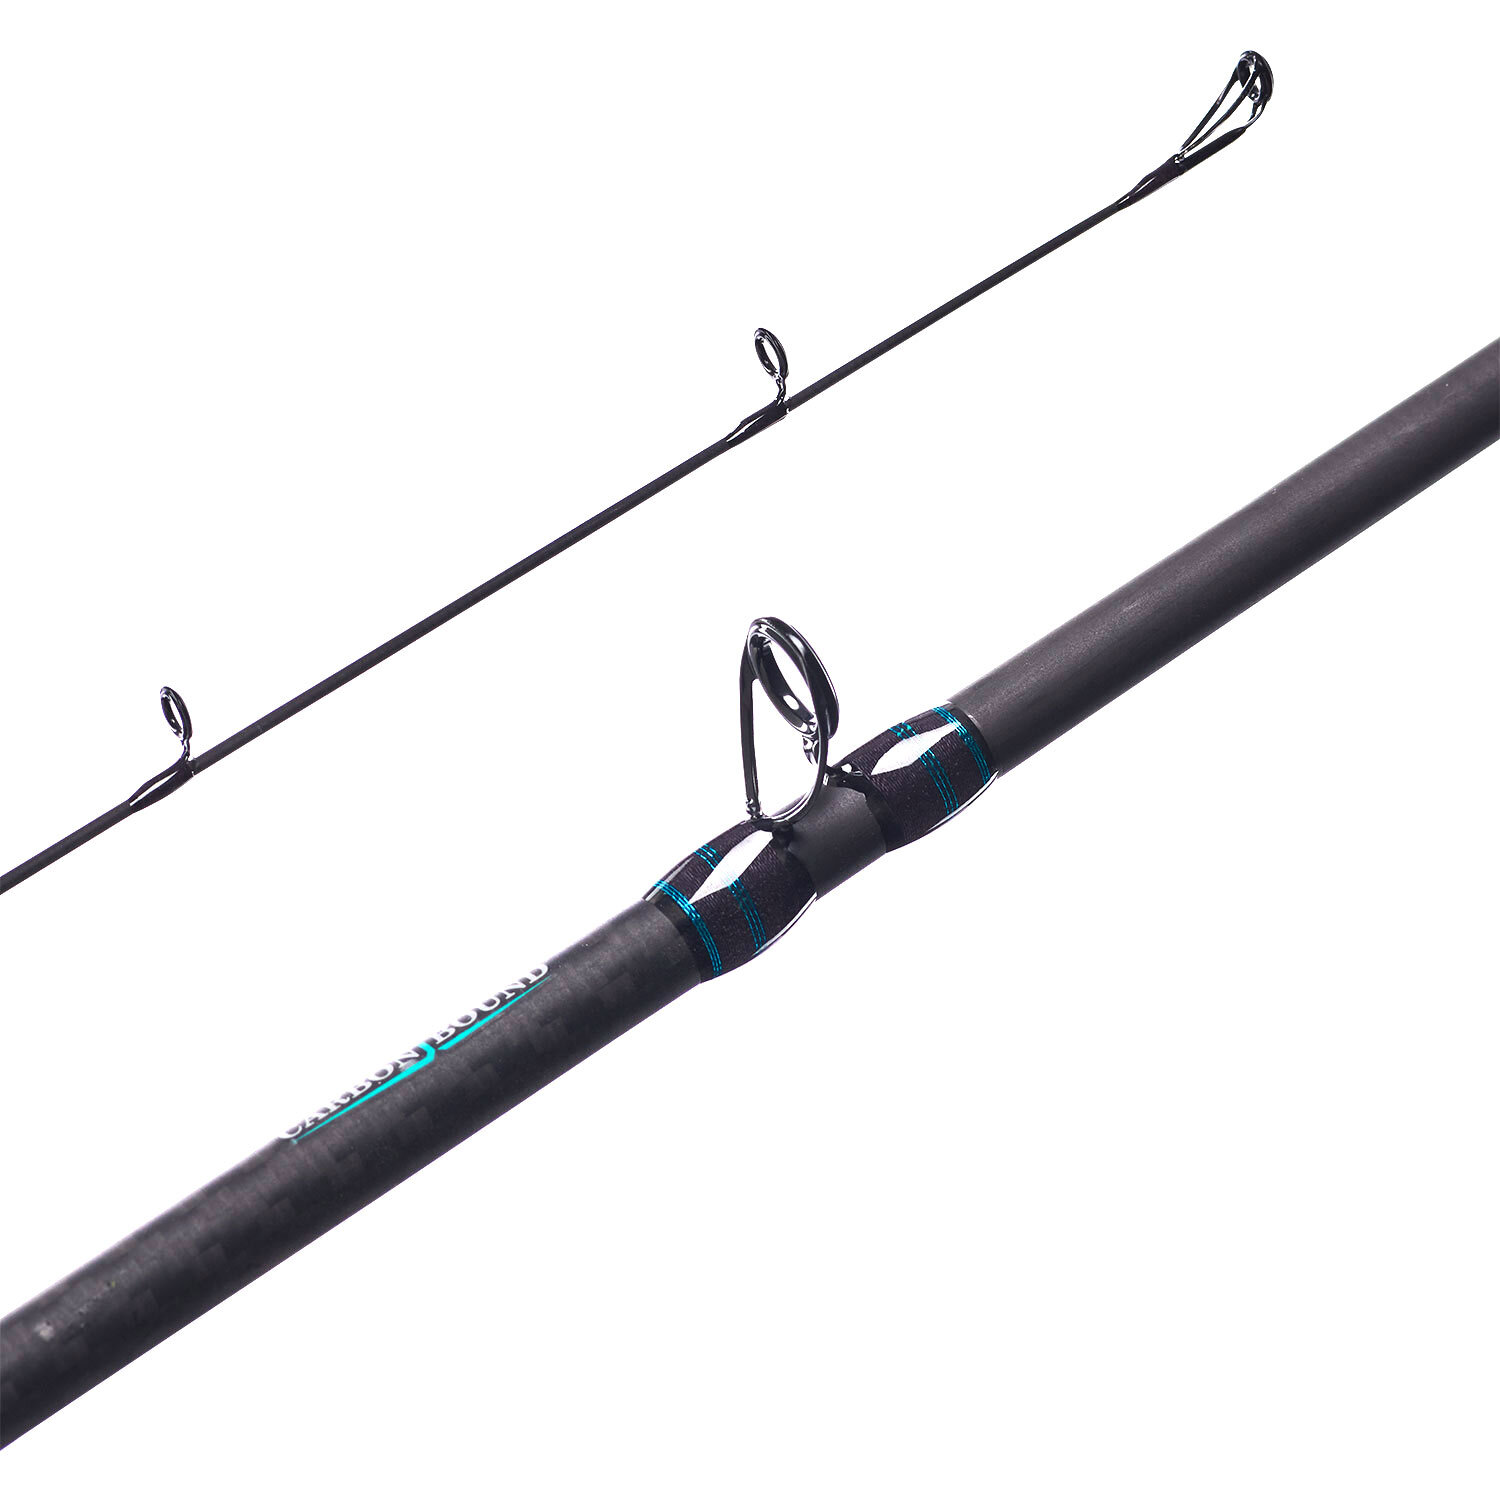 Boat Fishing Rods Histar Magician Pole DKK Guide Ring 3A Grade Cork Grip  High Carbon Double Action Spinning Caster Rod 230904 From Fan06, $166.26